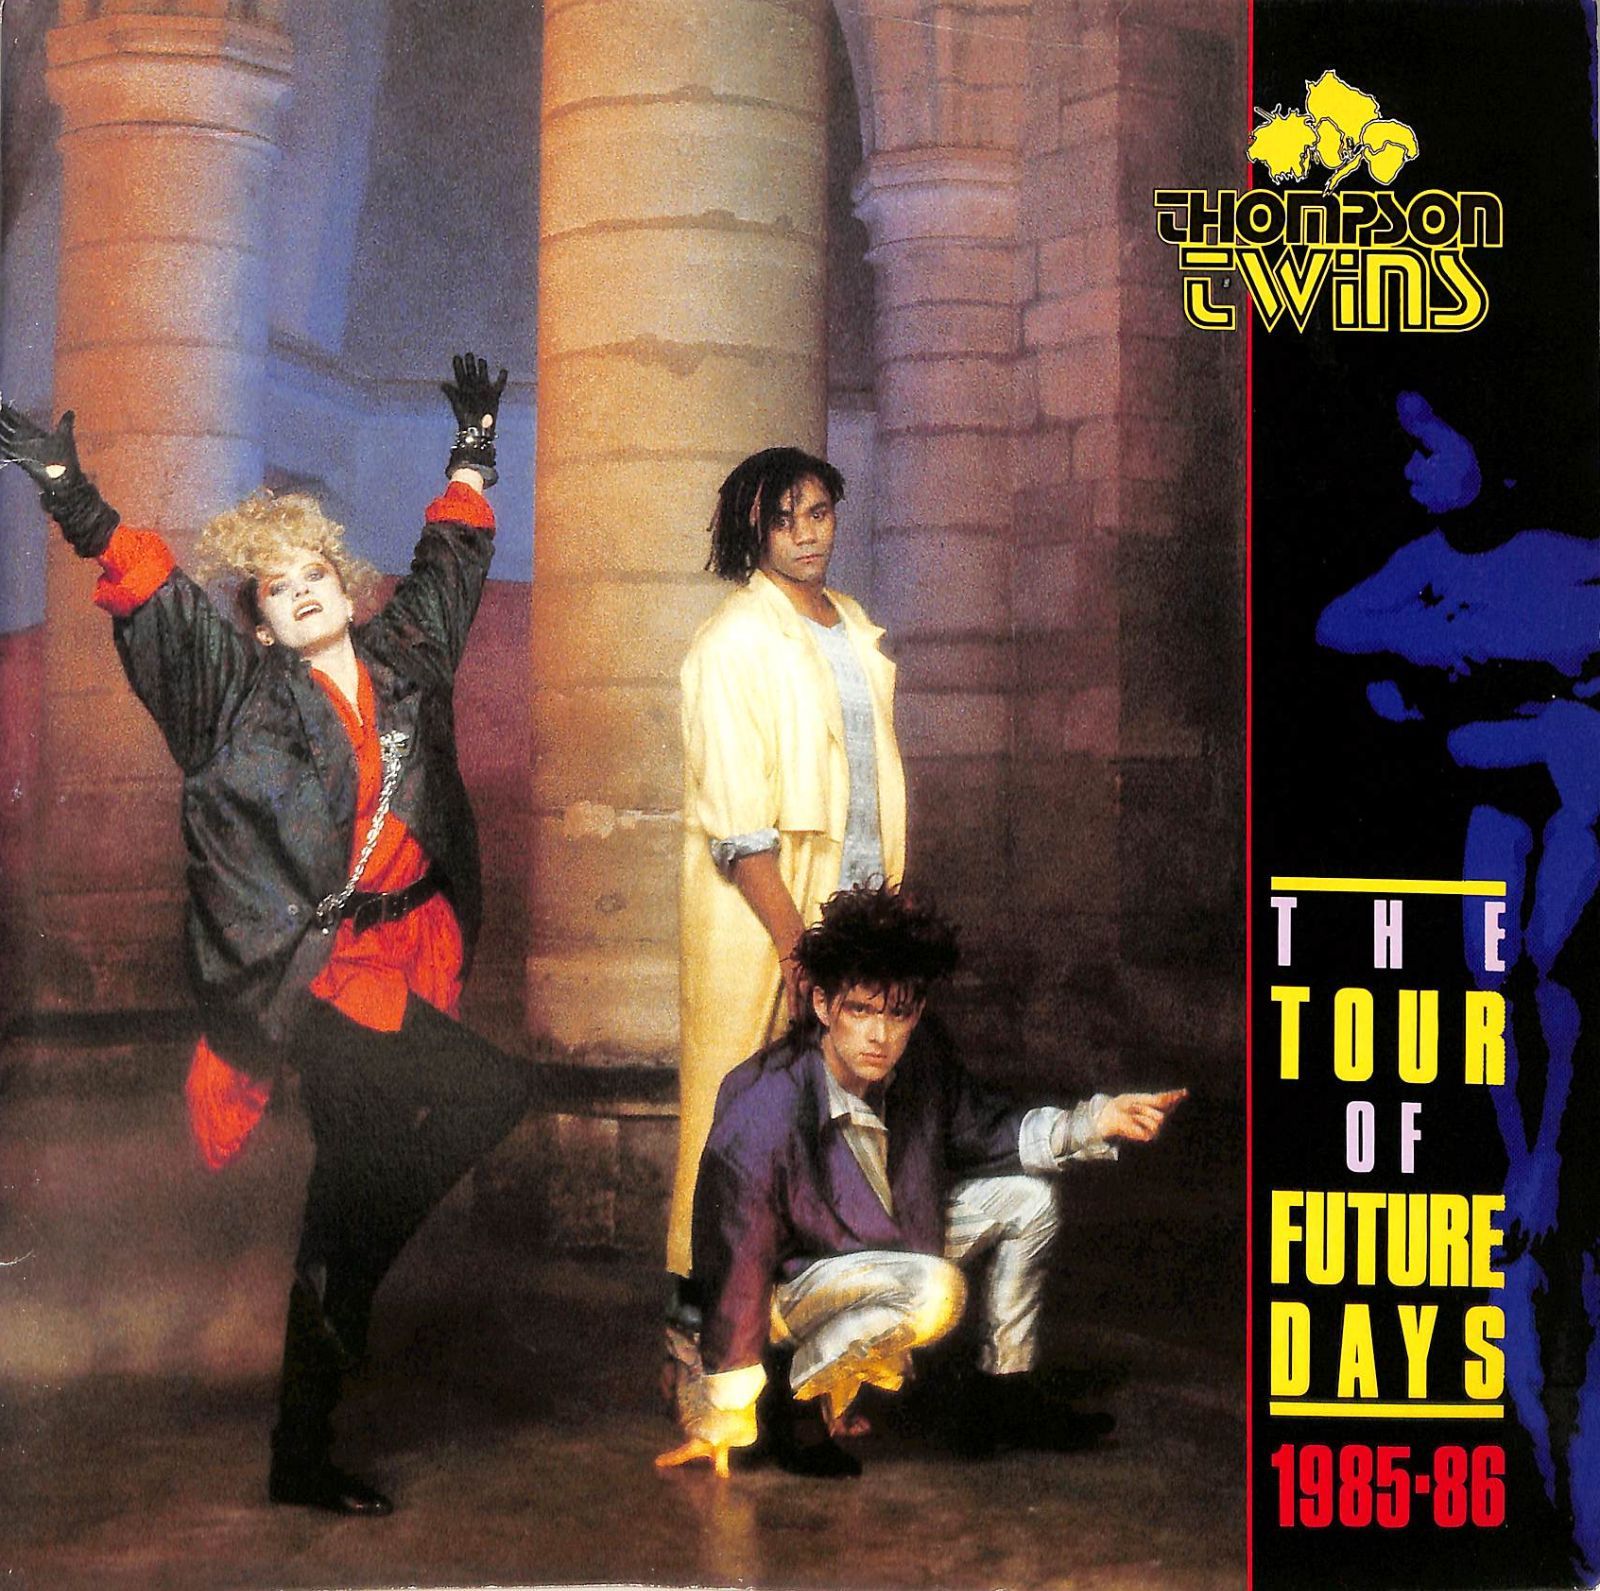 Thompson Twins The Tour Of Future Days 1985-86 ツアー パンフレット / トンプソン ツインズ コンサート